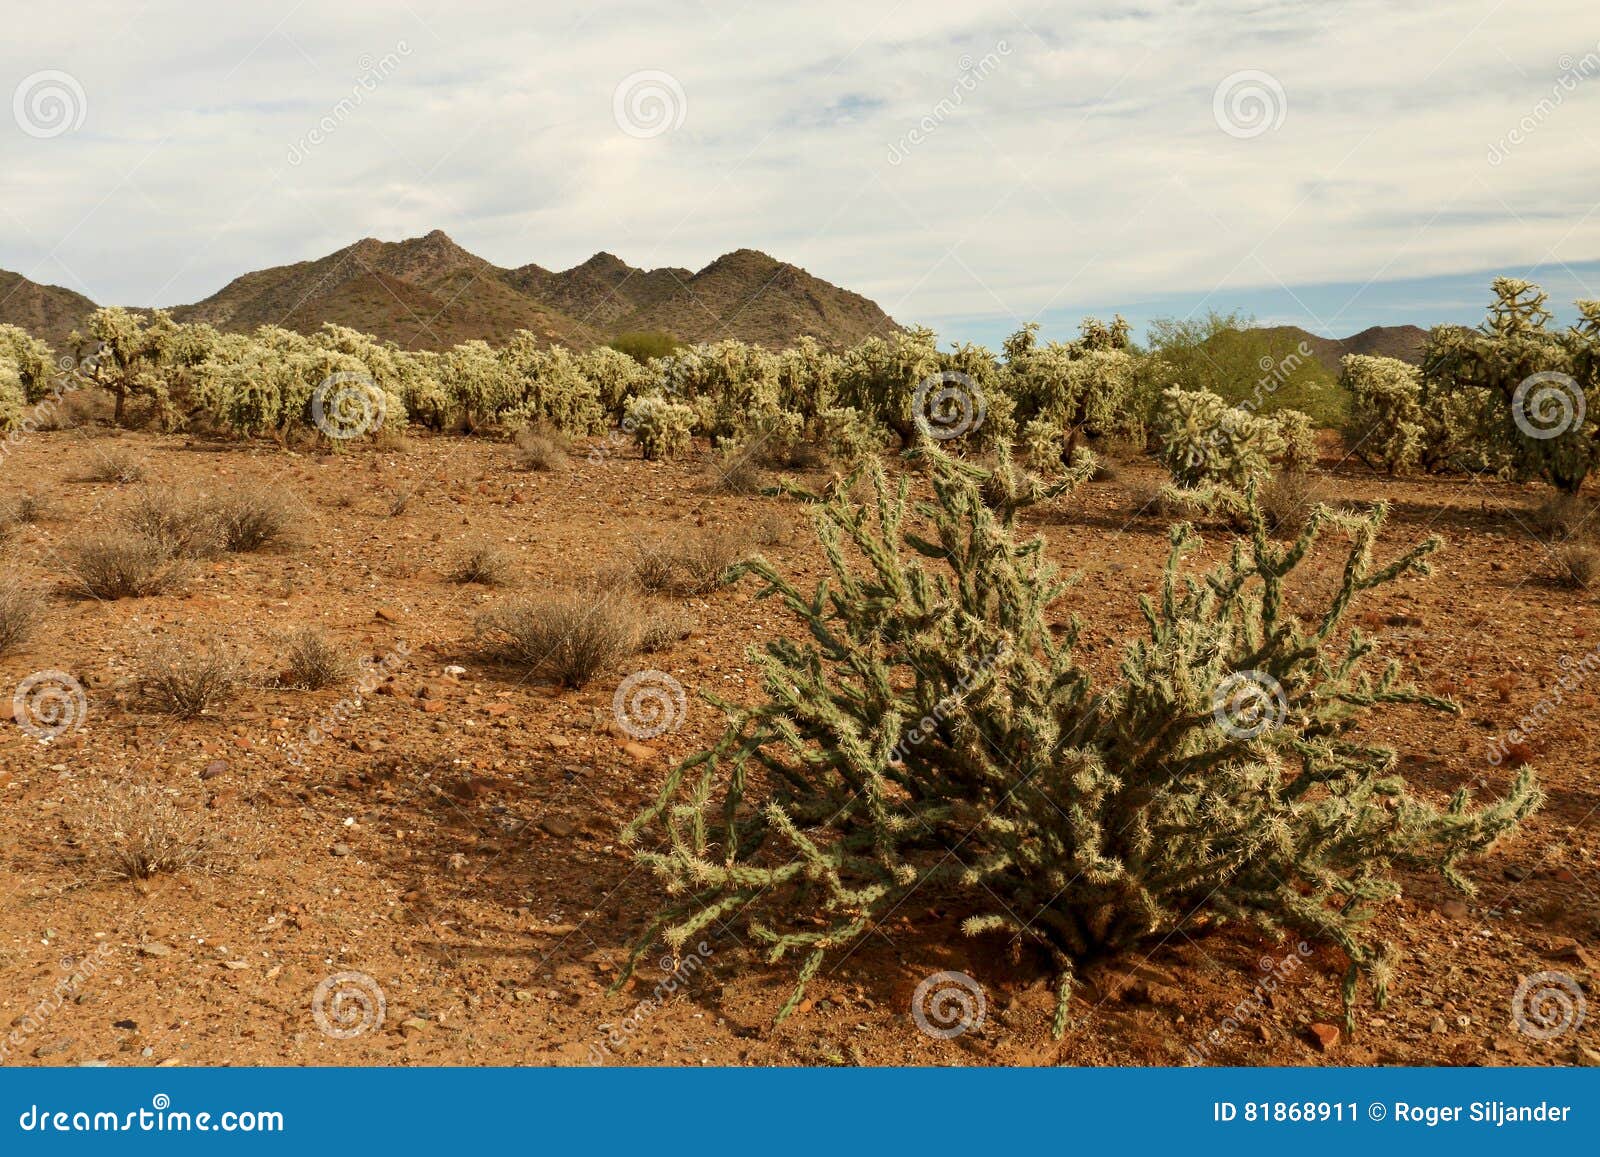 staghorn cactus in front of cholla